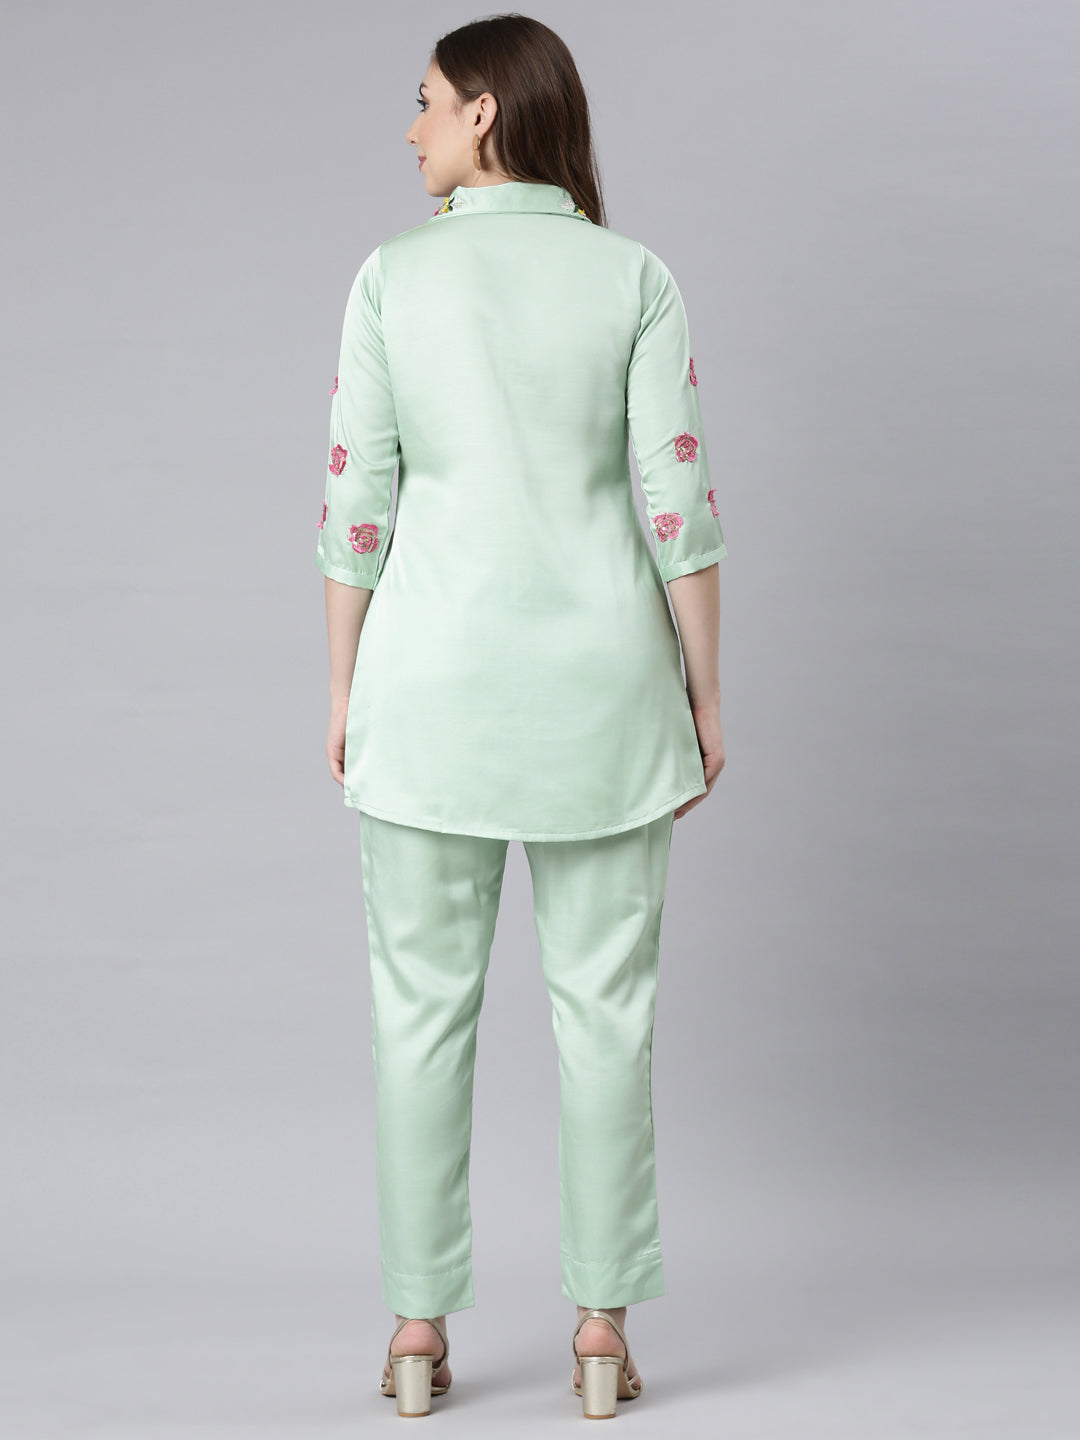 Neerus Pista Casual Embroidered Top And Trousers